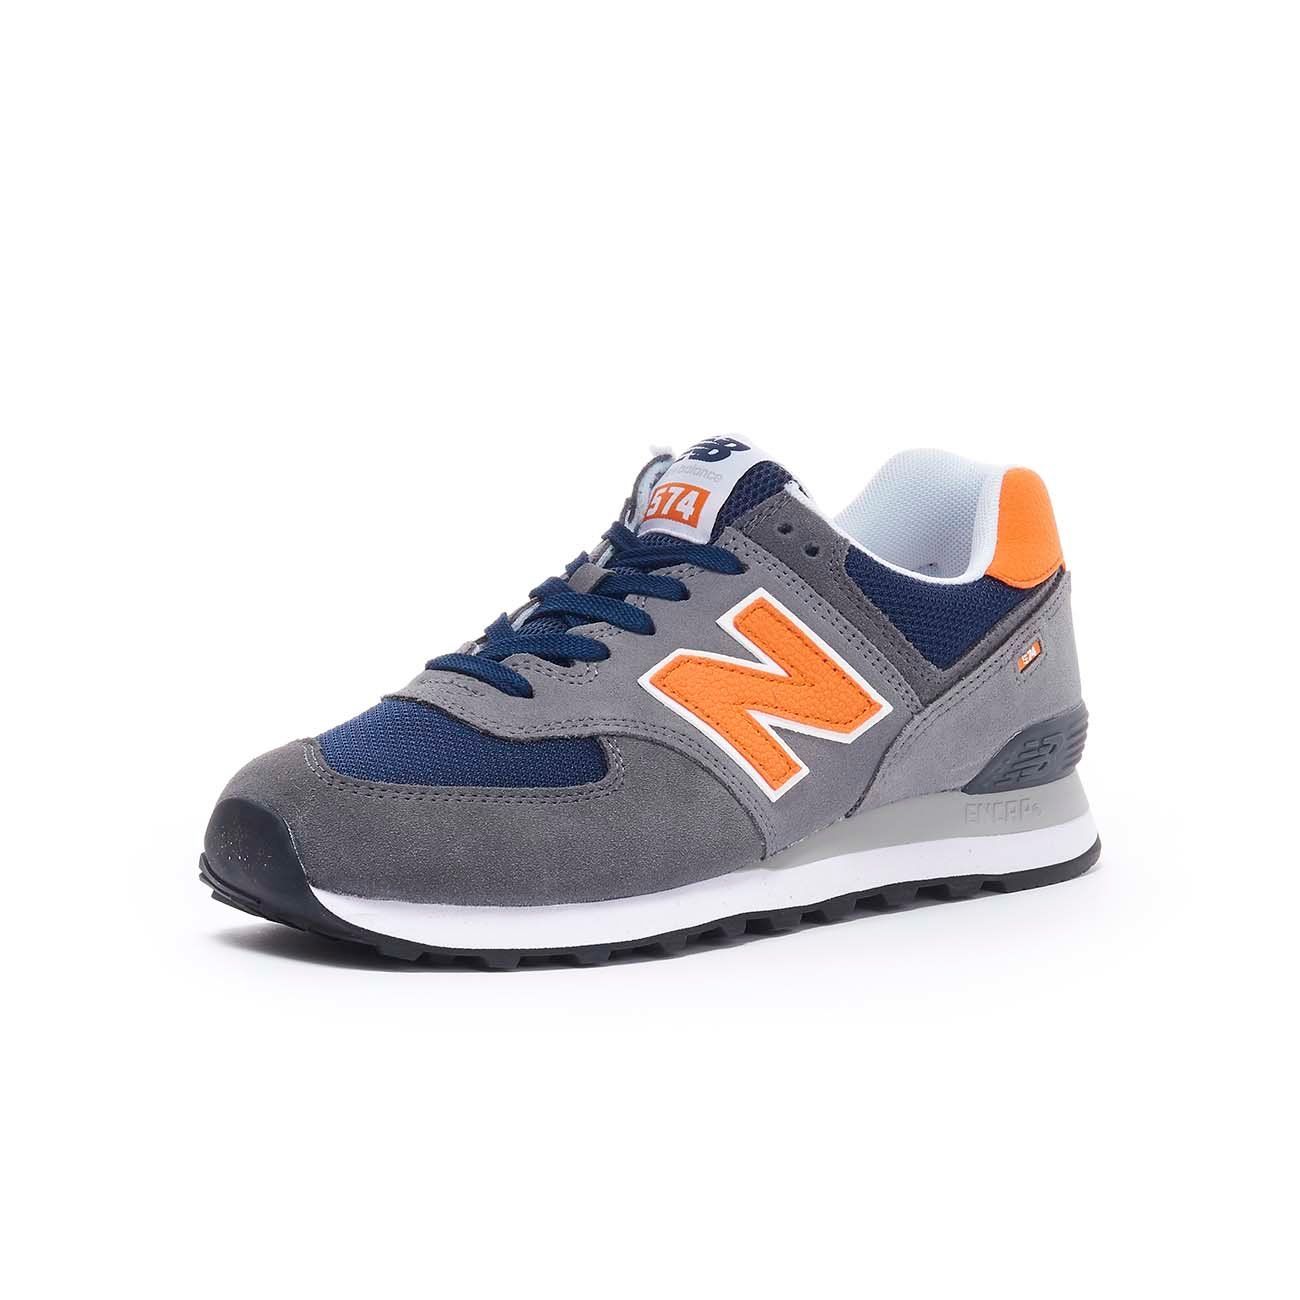 NEW BALANCE SNEAKERS 574 LIFESTYLE SUEDE MESH Man Grey Navy ...